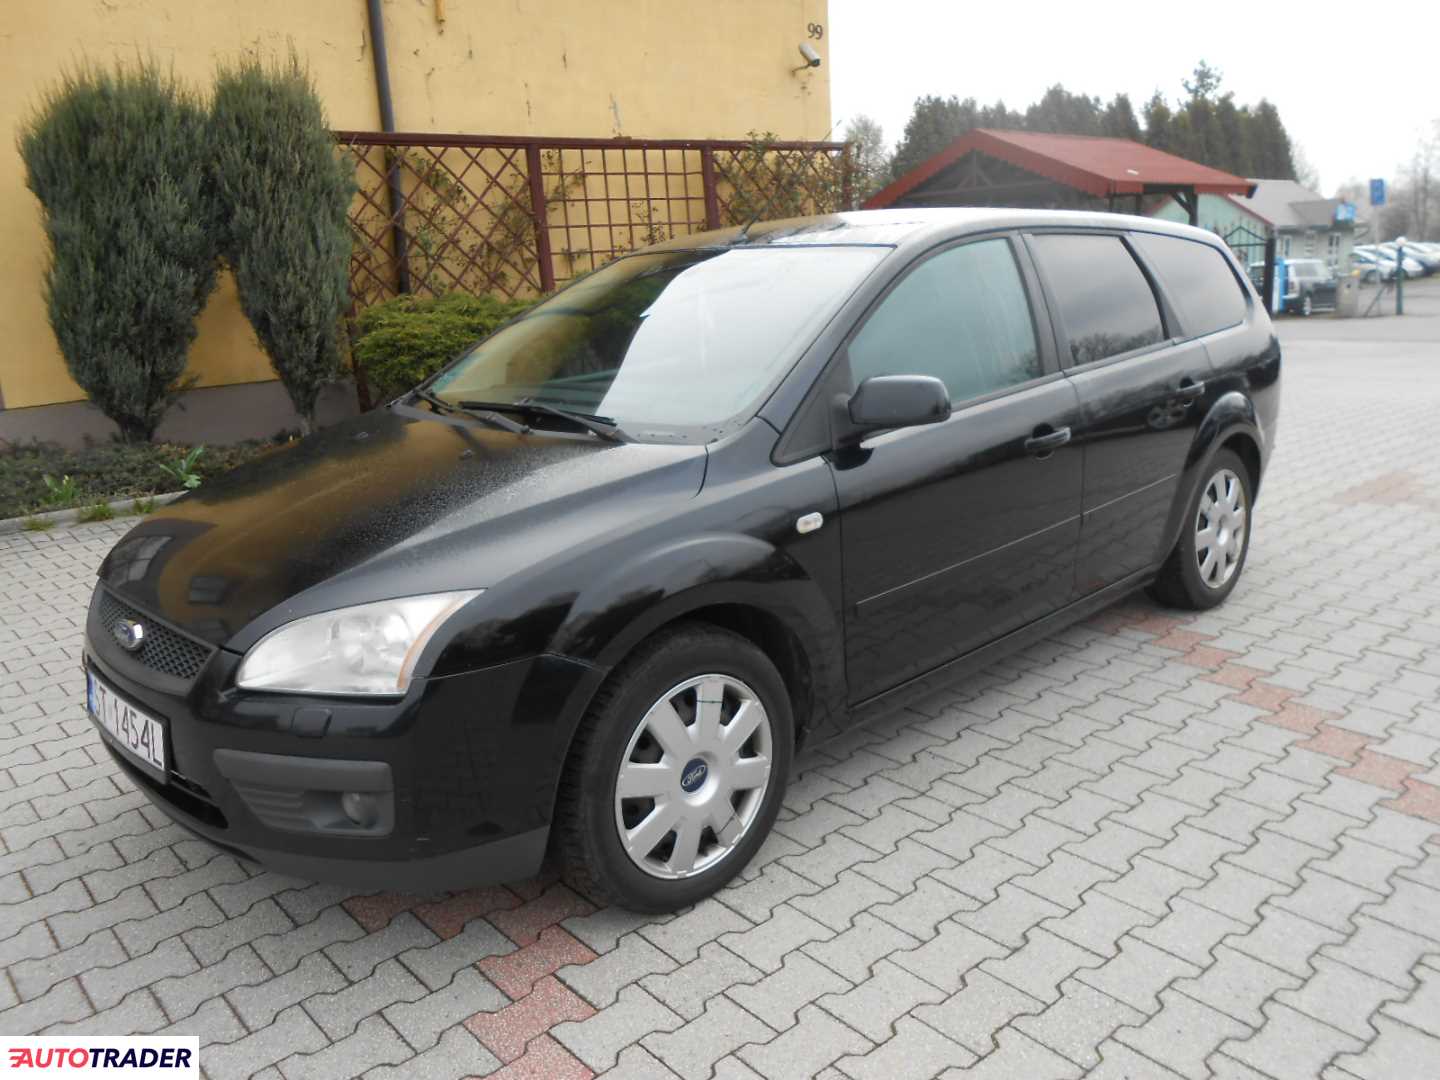 Ford Focus 2007 2.0 136 KM